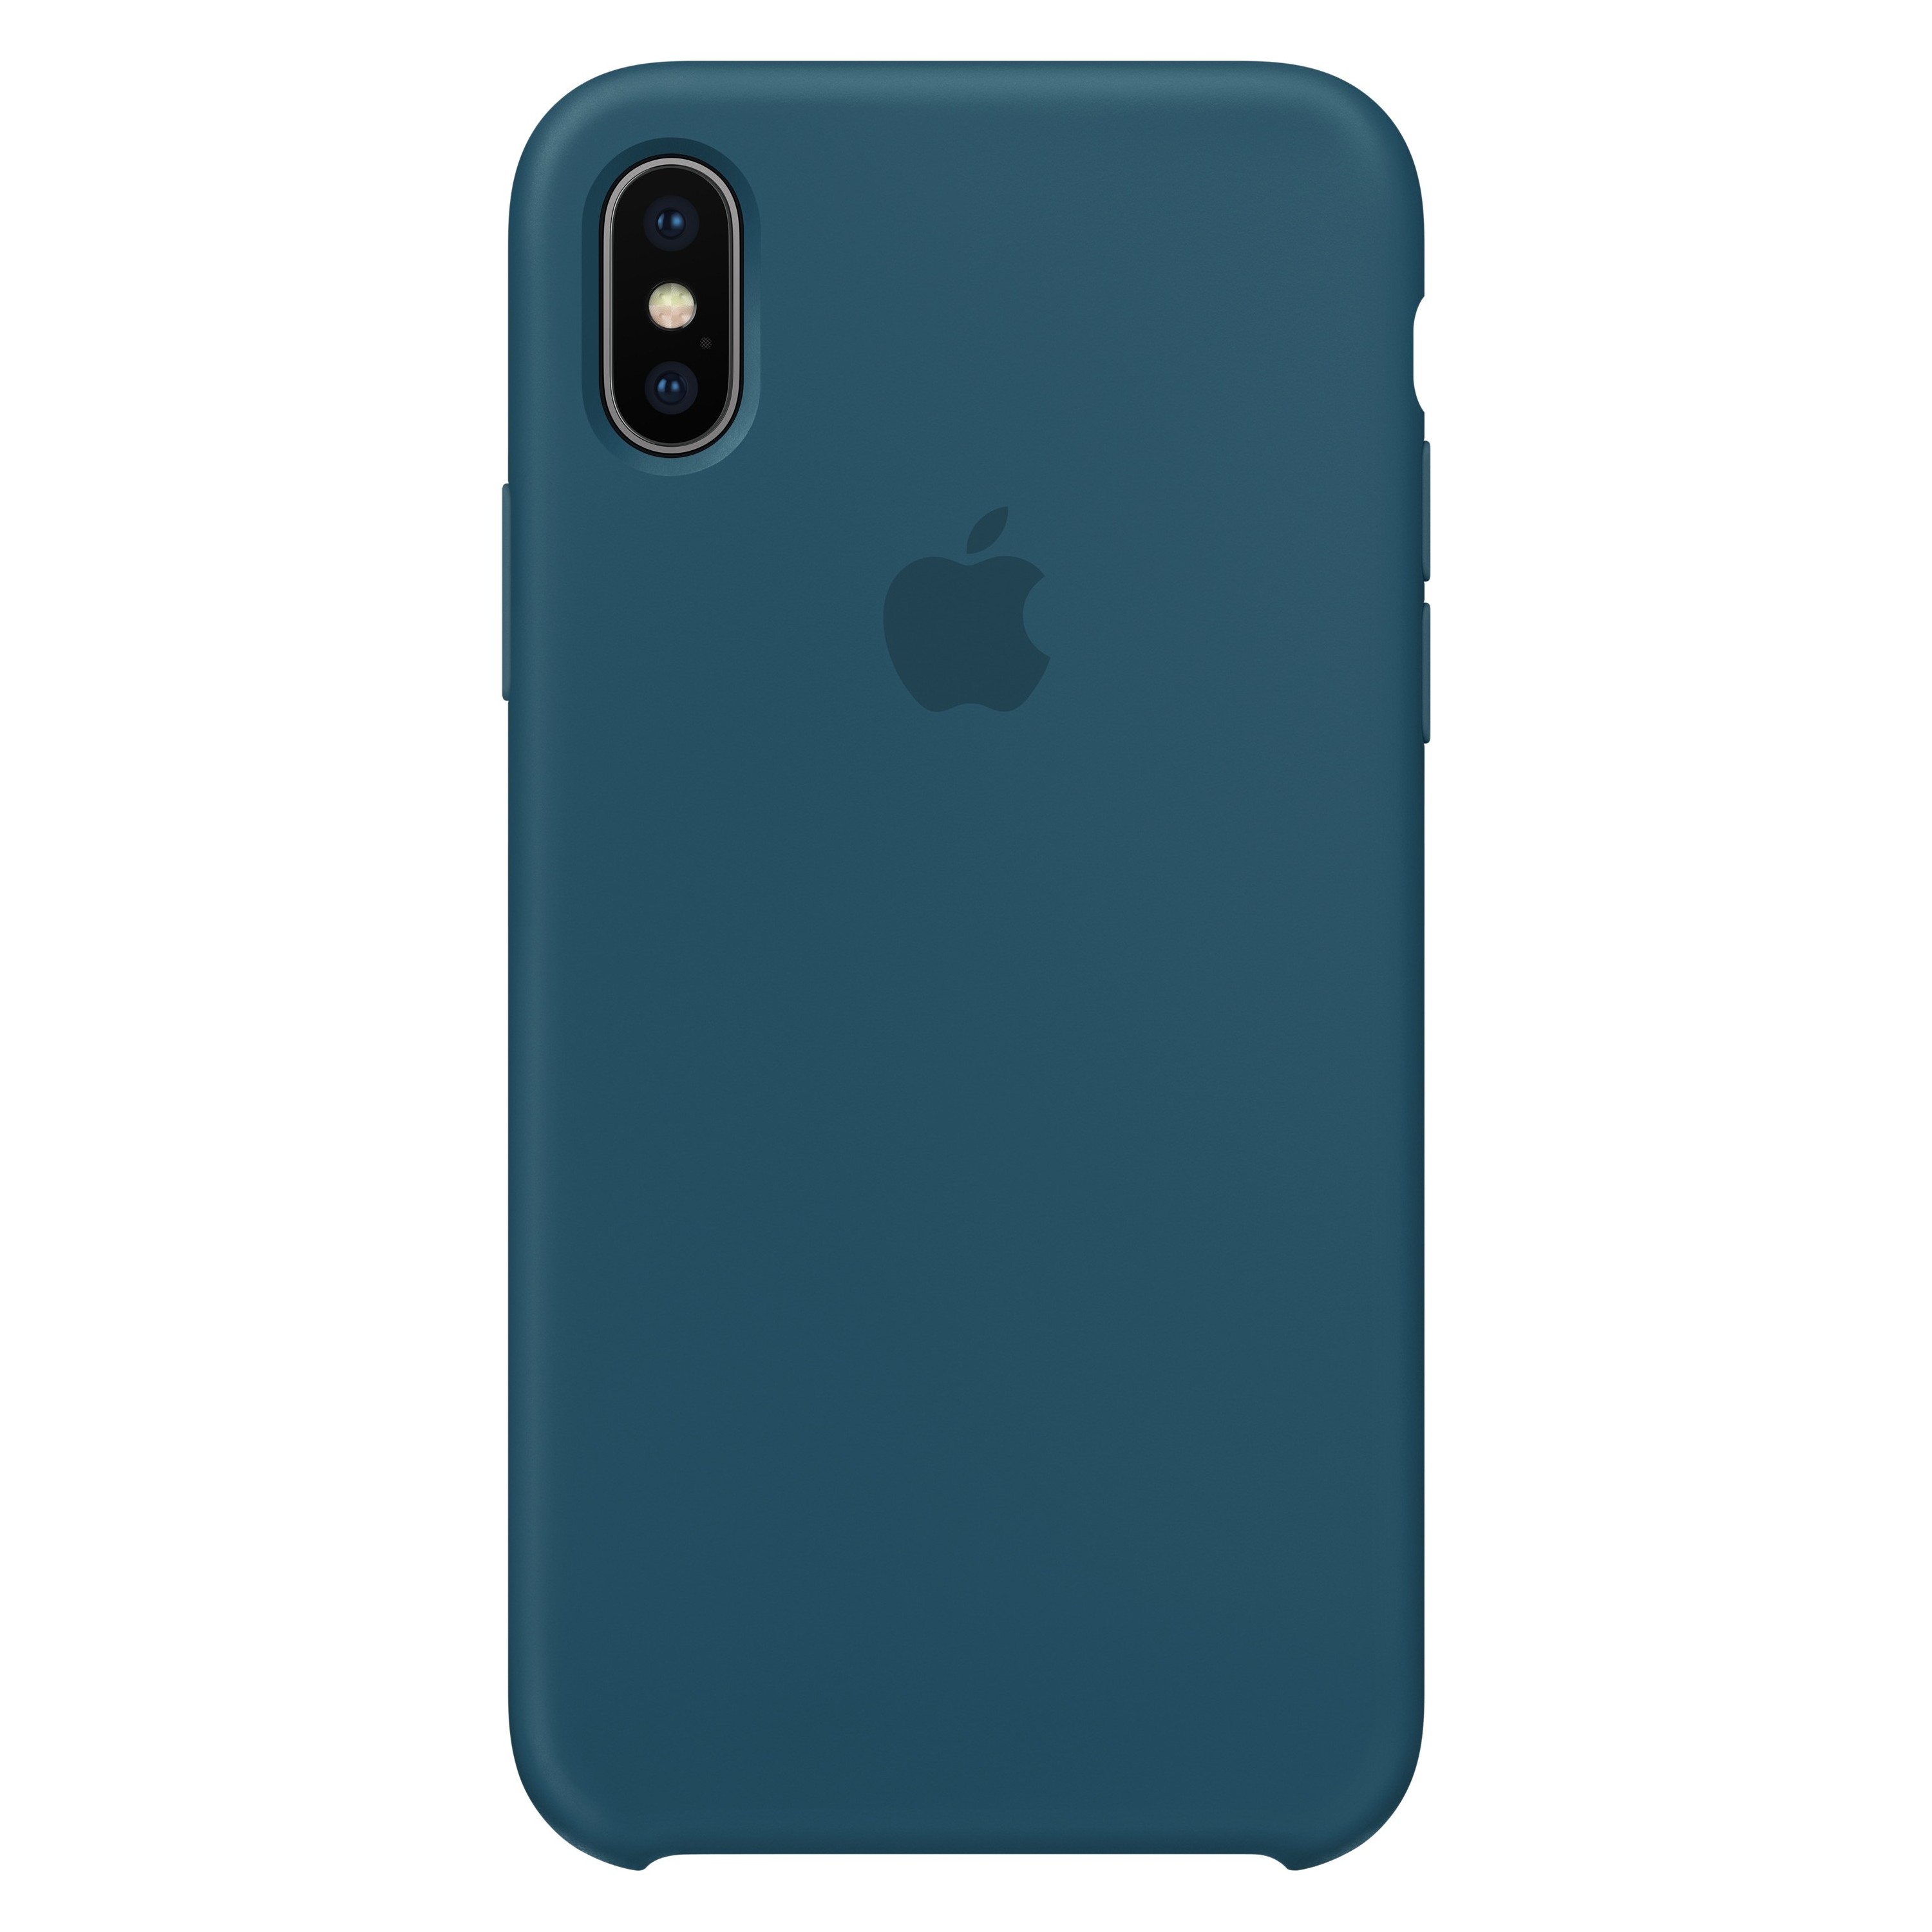 Refurbished Apple MR6G2ZM/A Silicone Case for iPhone X - Cosmos Blue - image 4 of 5